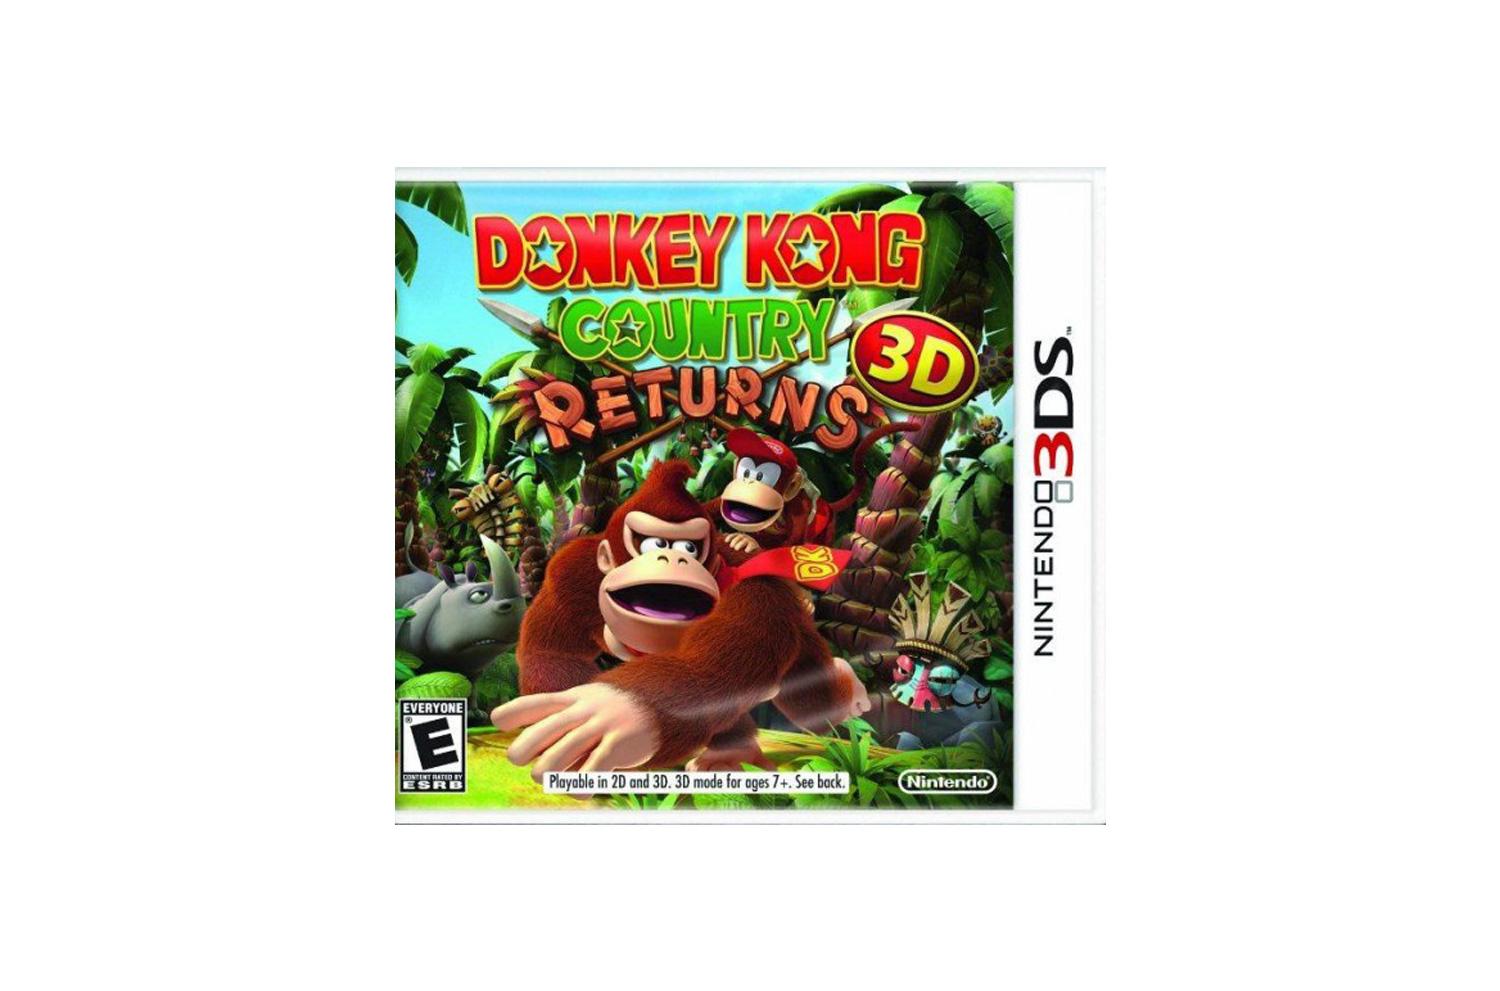 Mario Vs Donkey Kong Demo Walkthrough, Gameplay, Release Date and